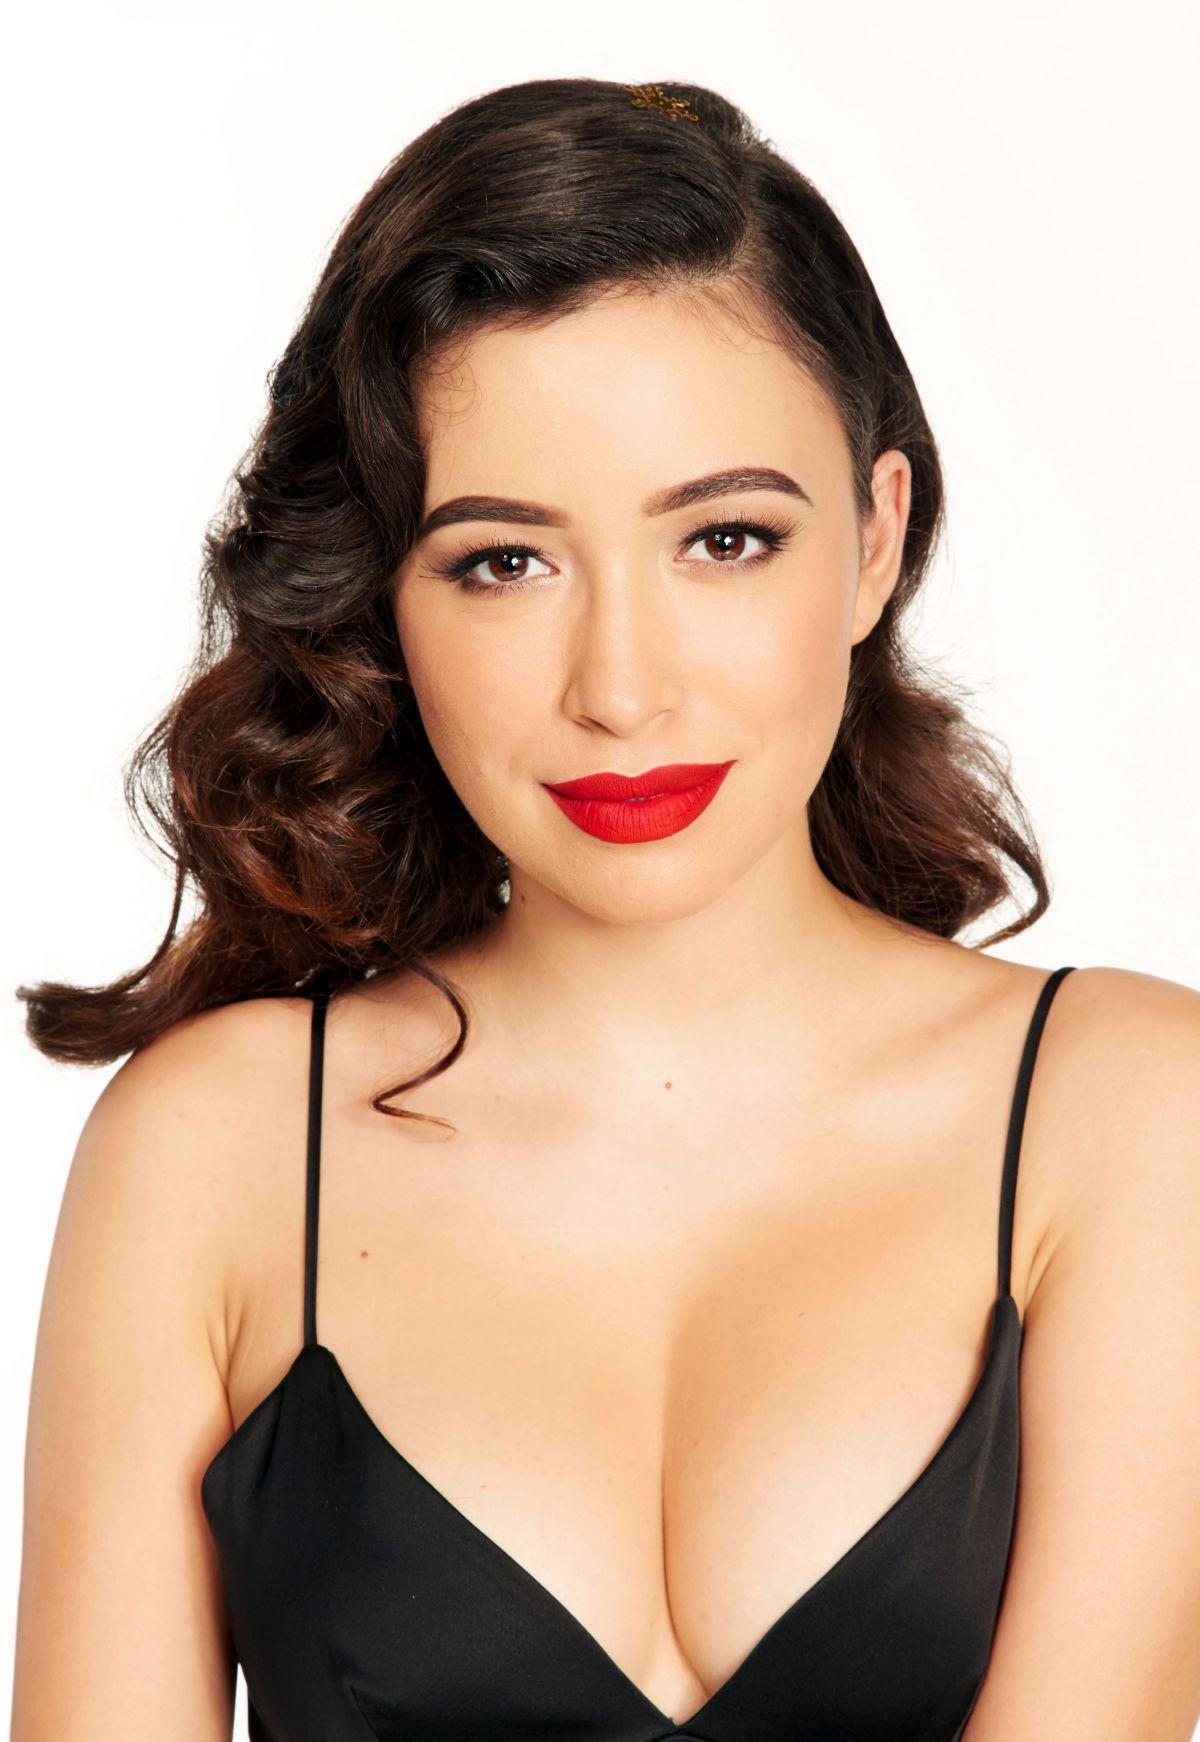 Hottest Christian Serratos Picture Will Make You Hot under